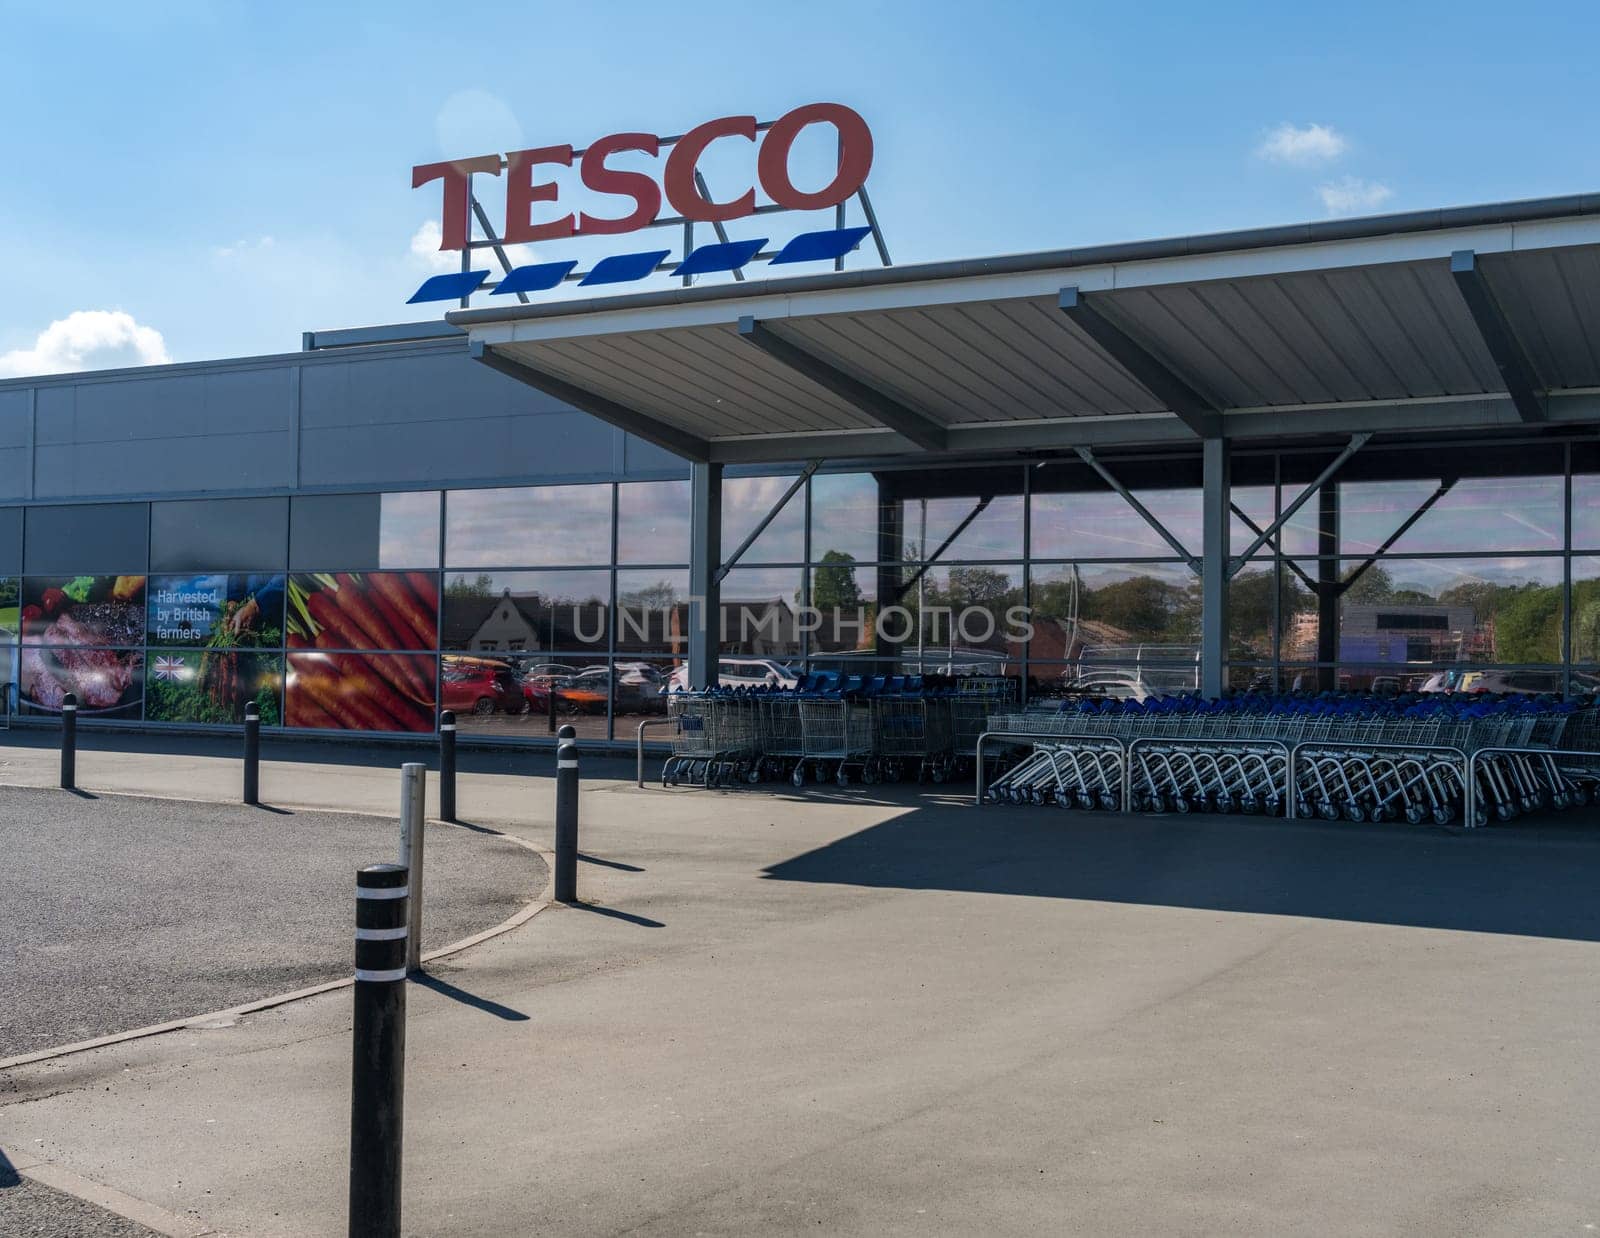 Ellesmere, Shropshire - 12 May 2023: Entrance to Tesco supermarket on sunny day in England